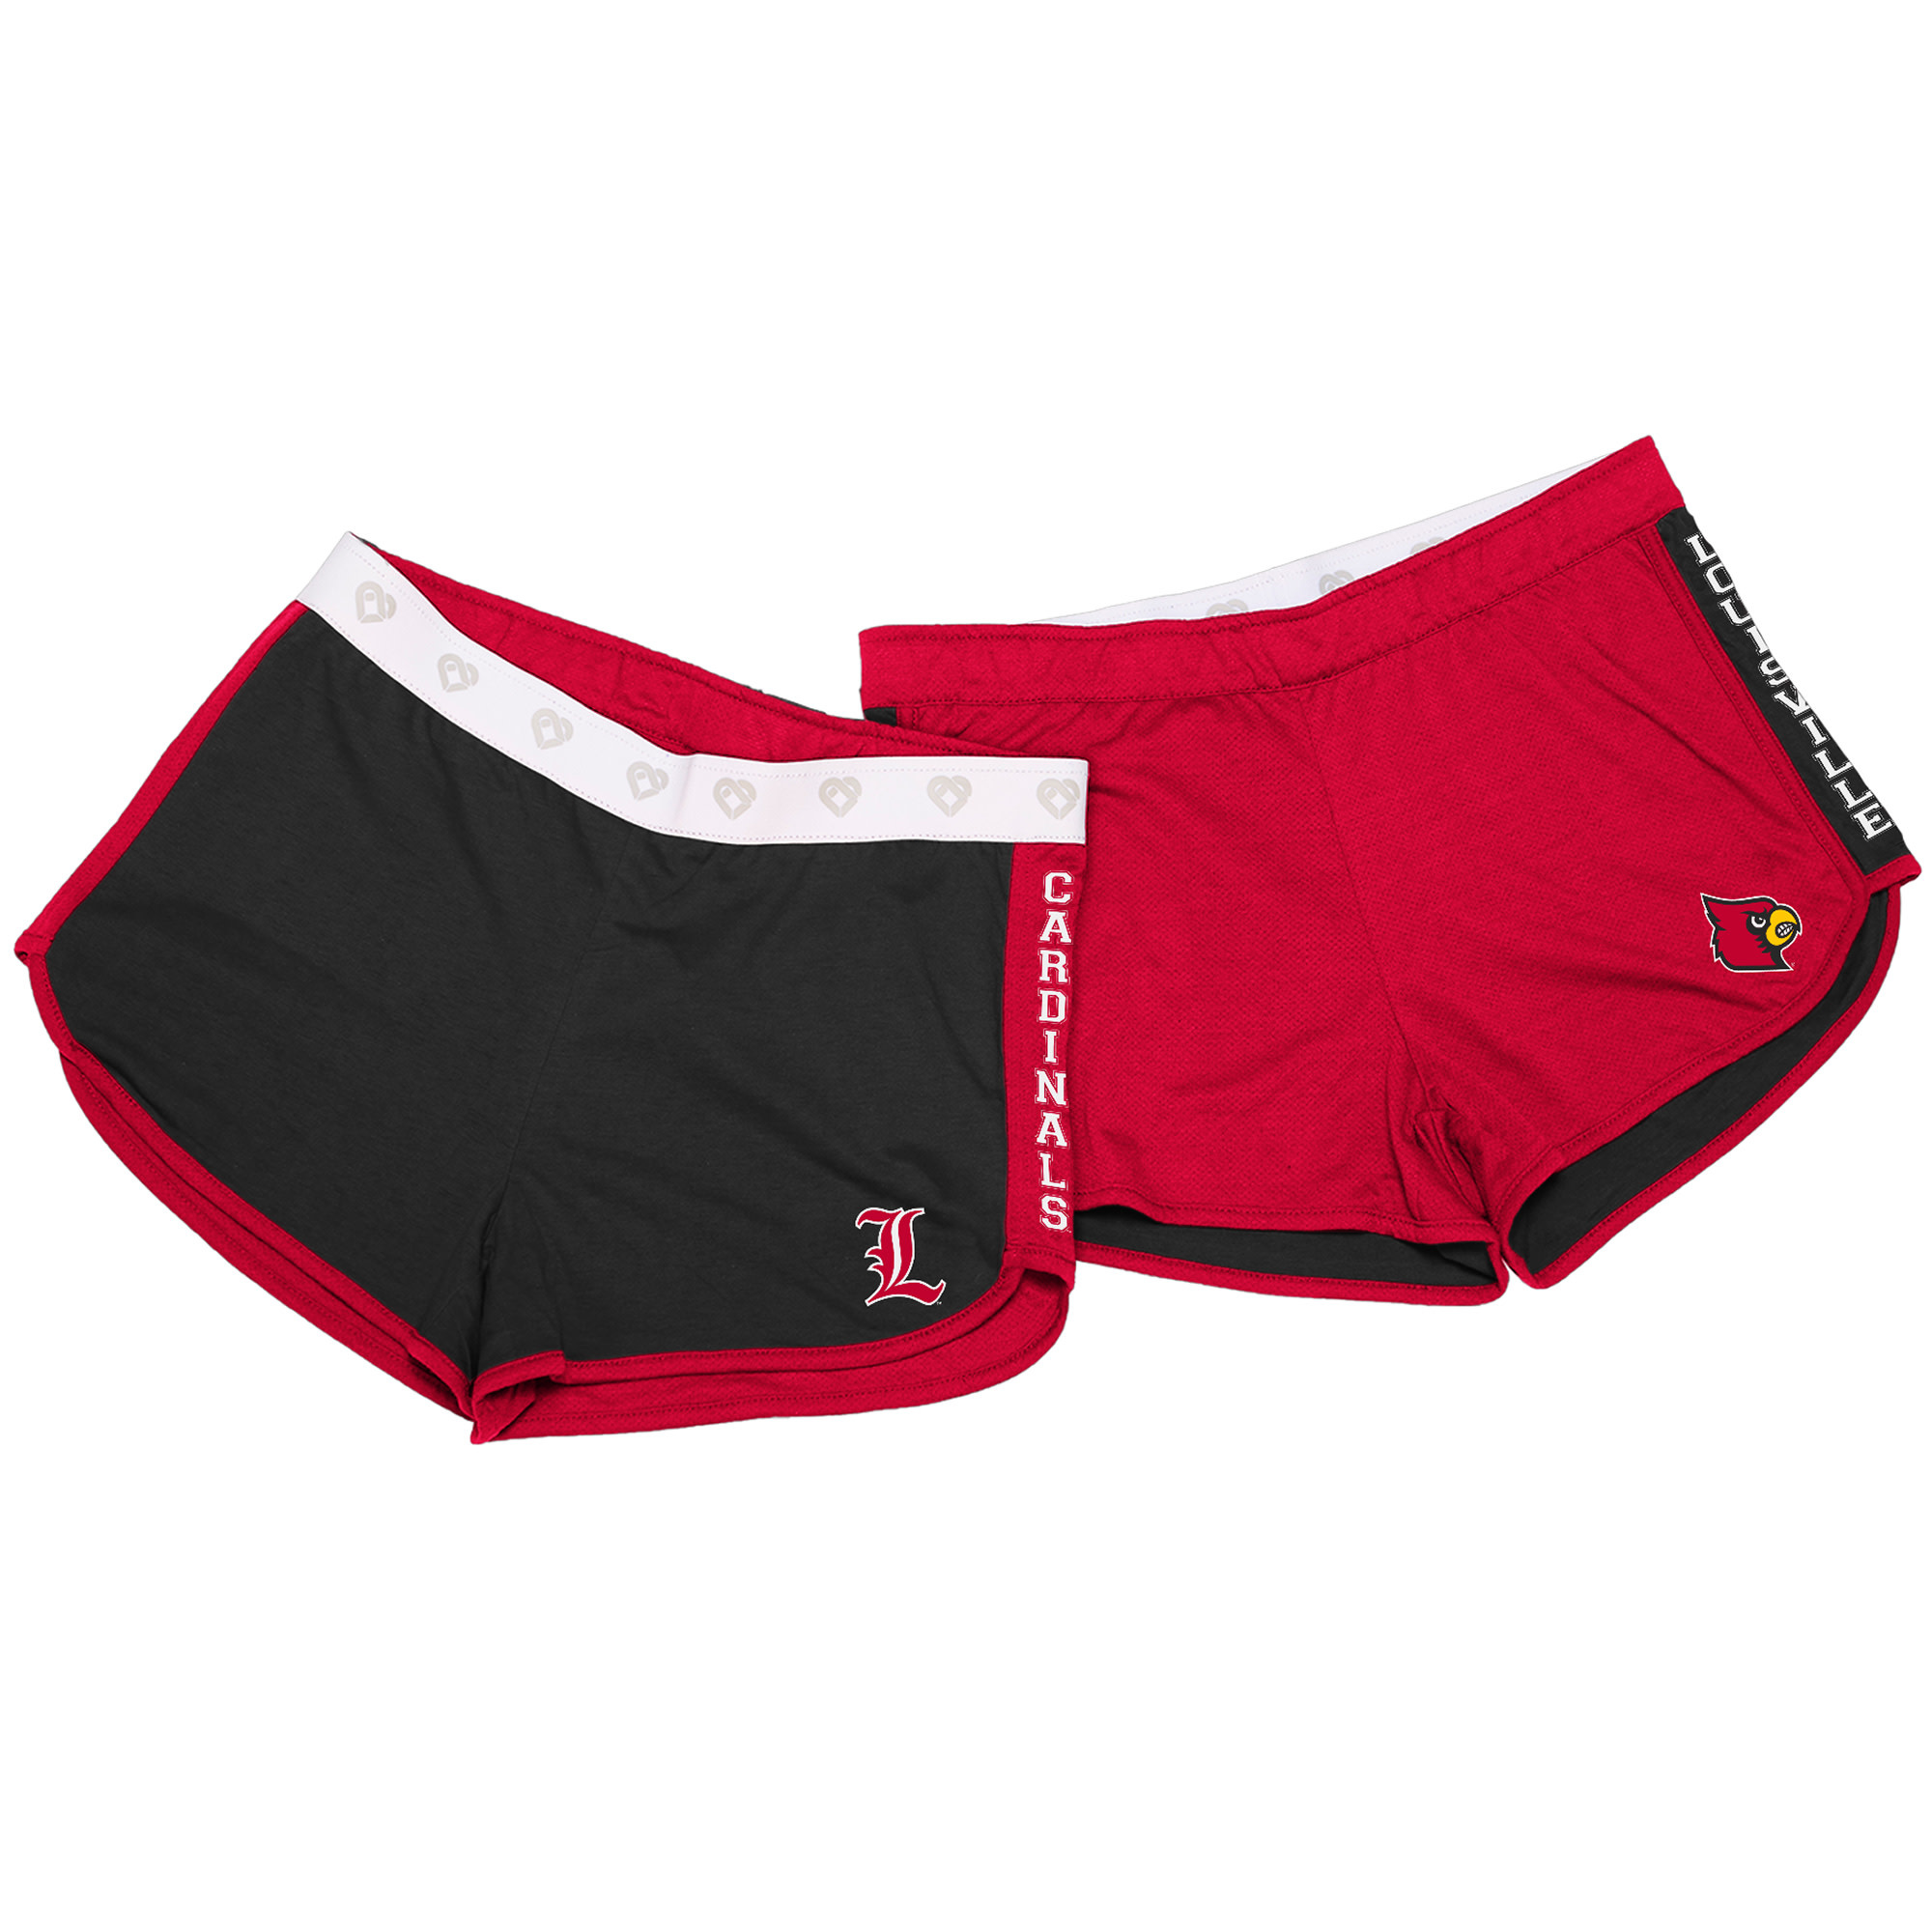  NCAA Louisville Cardinals Replica Shorts, Small, Red